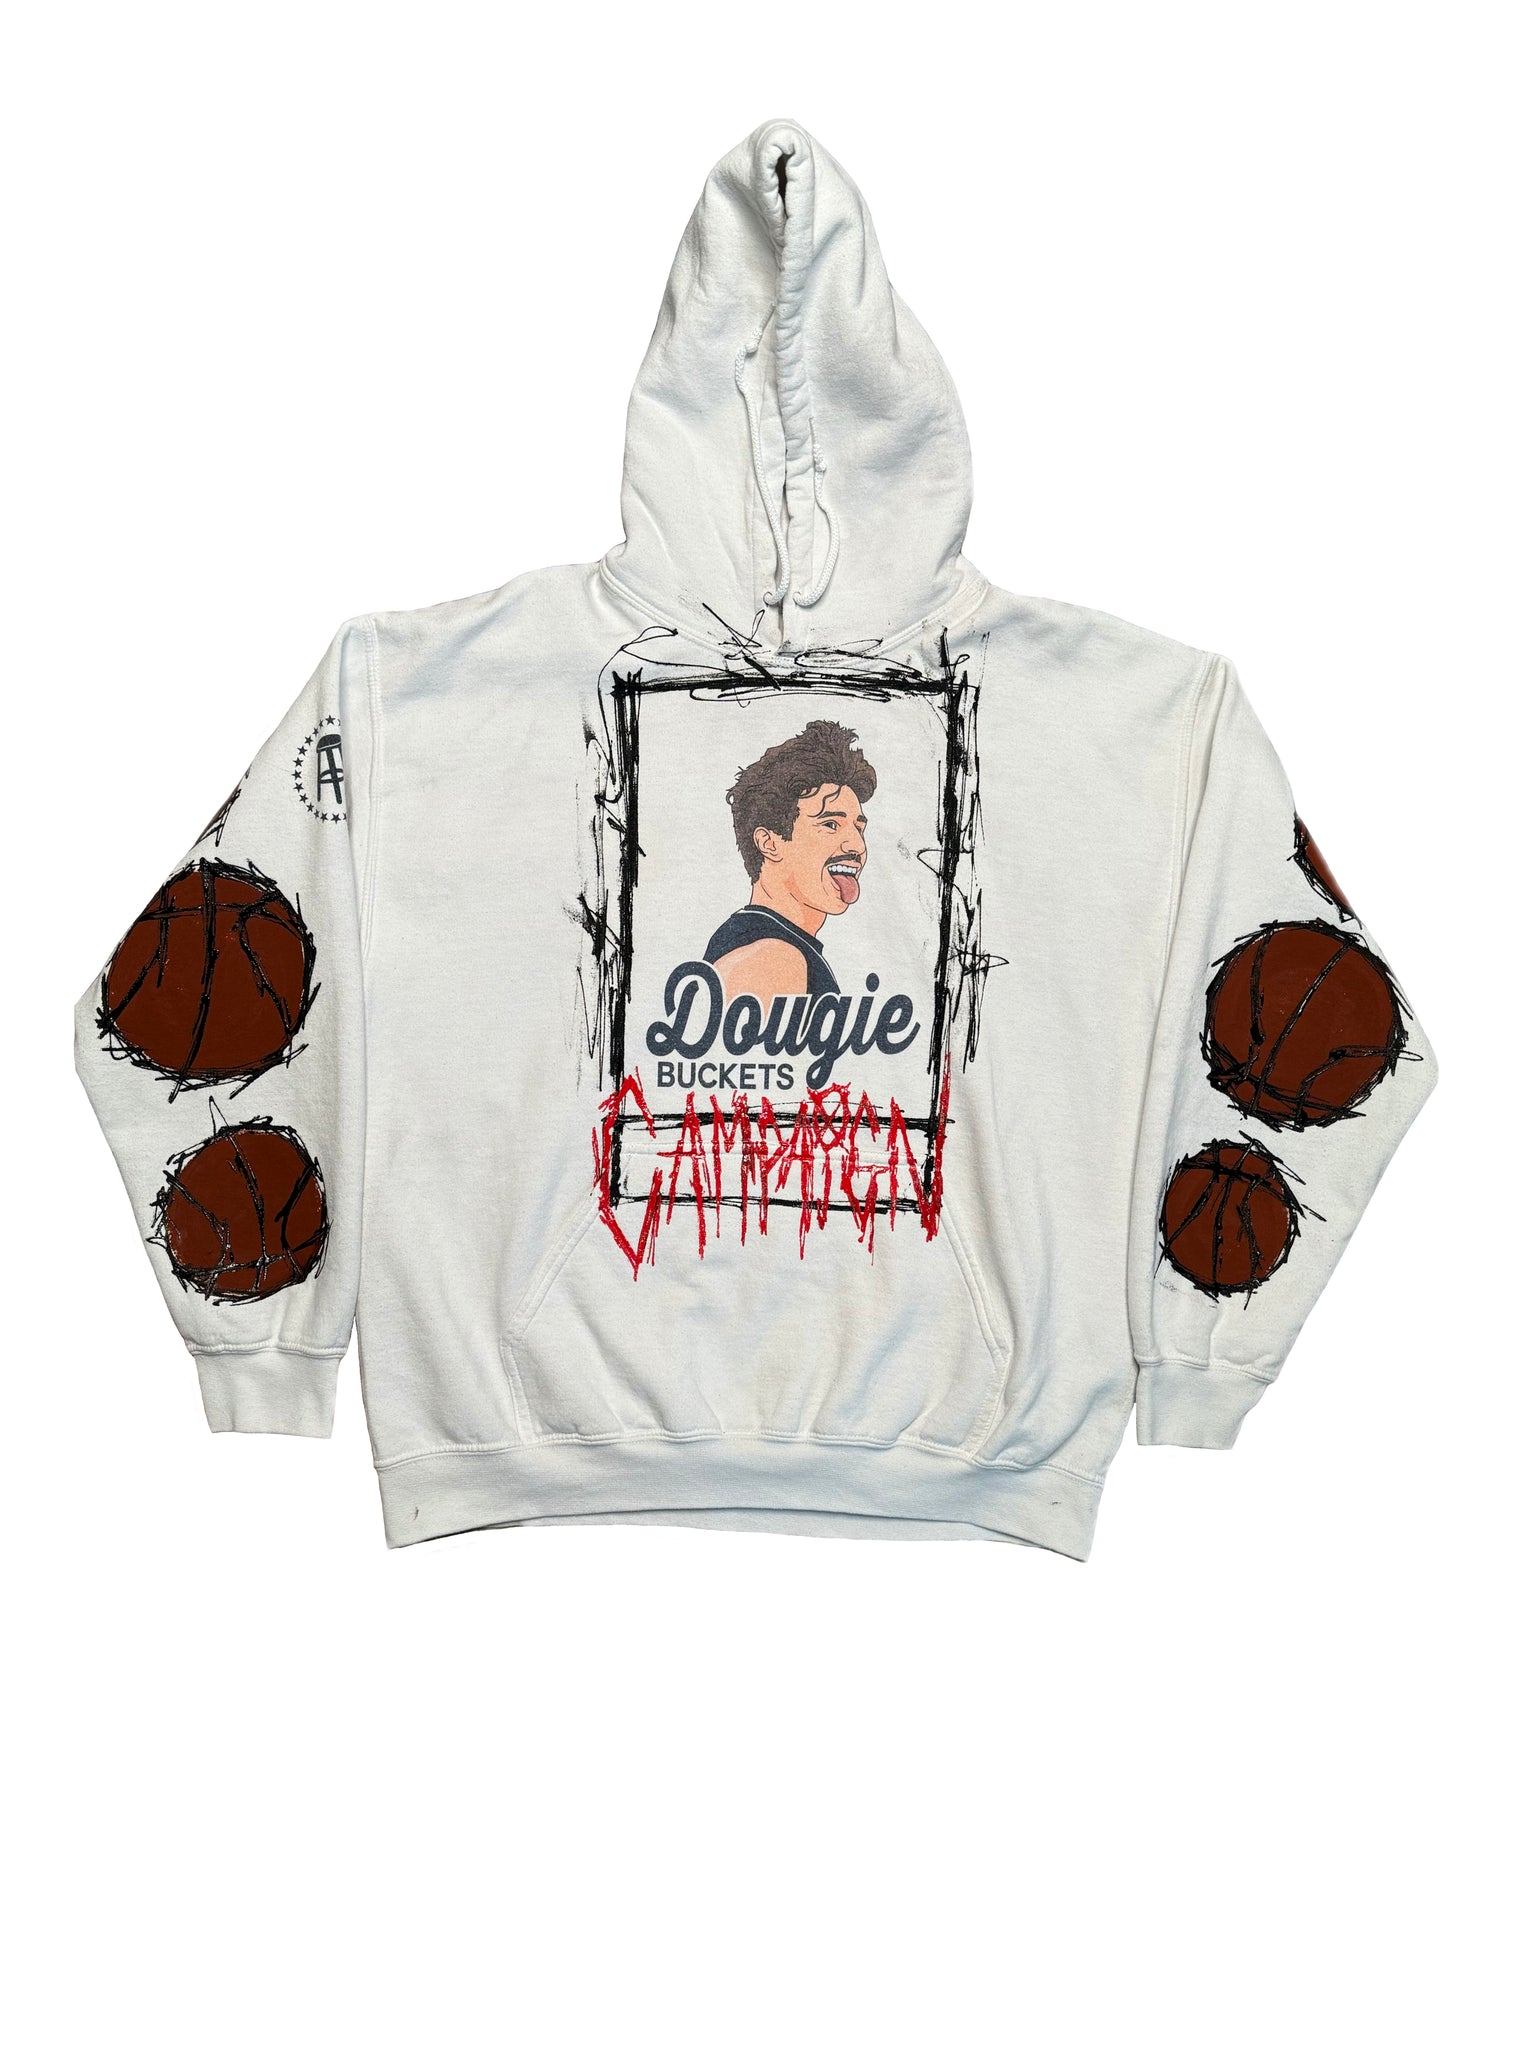 Dougie Buckets Upcycled Hoodie (Large)